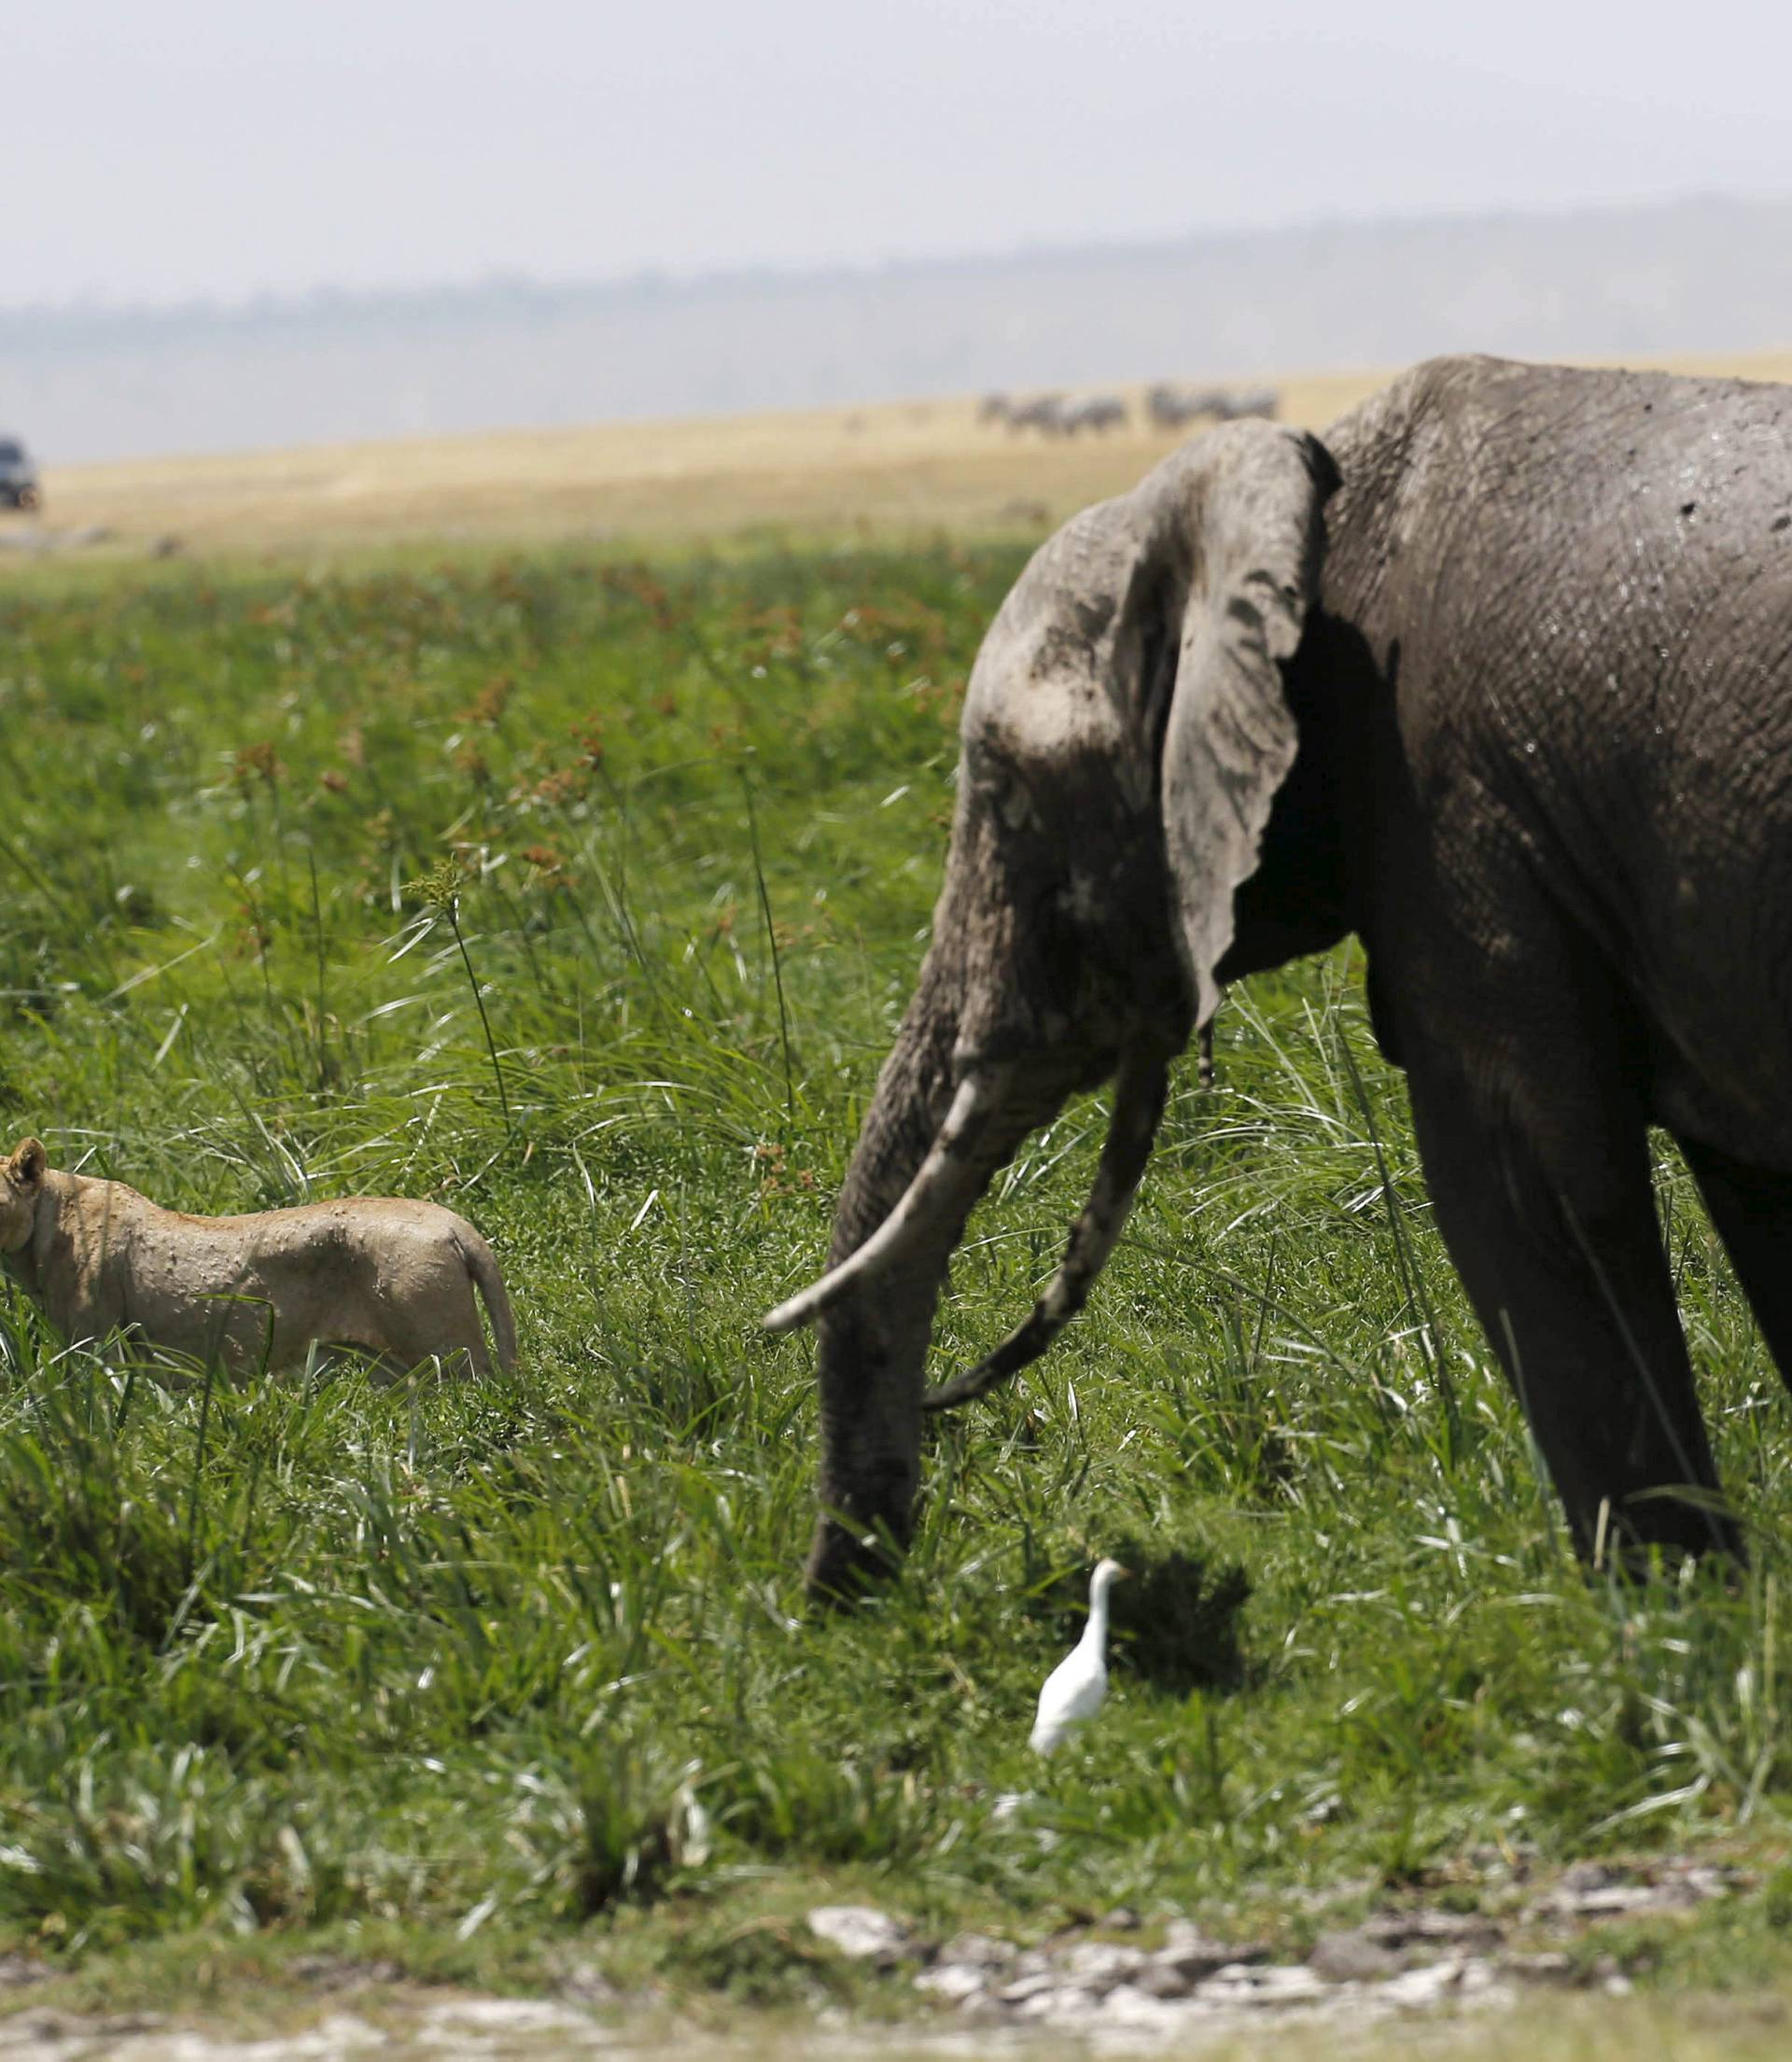 A lioness moves away from an elephant in Amboseli National Park, southeast of Kenya's capital Nairobi